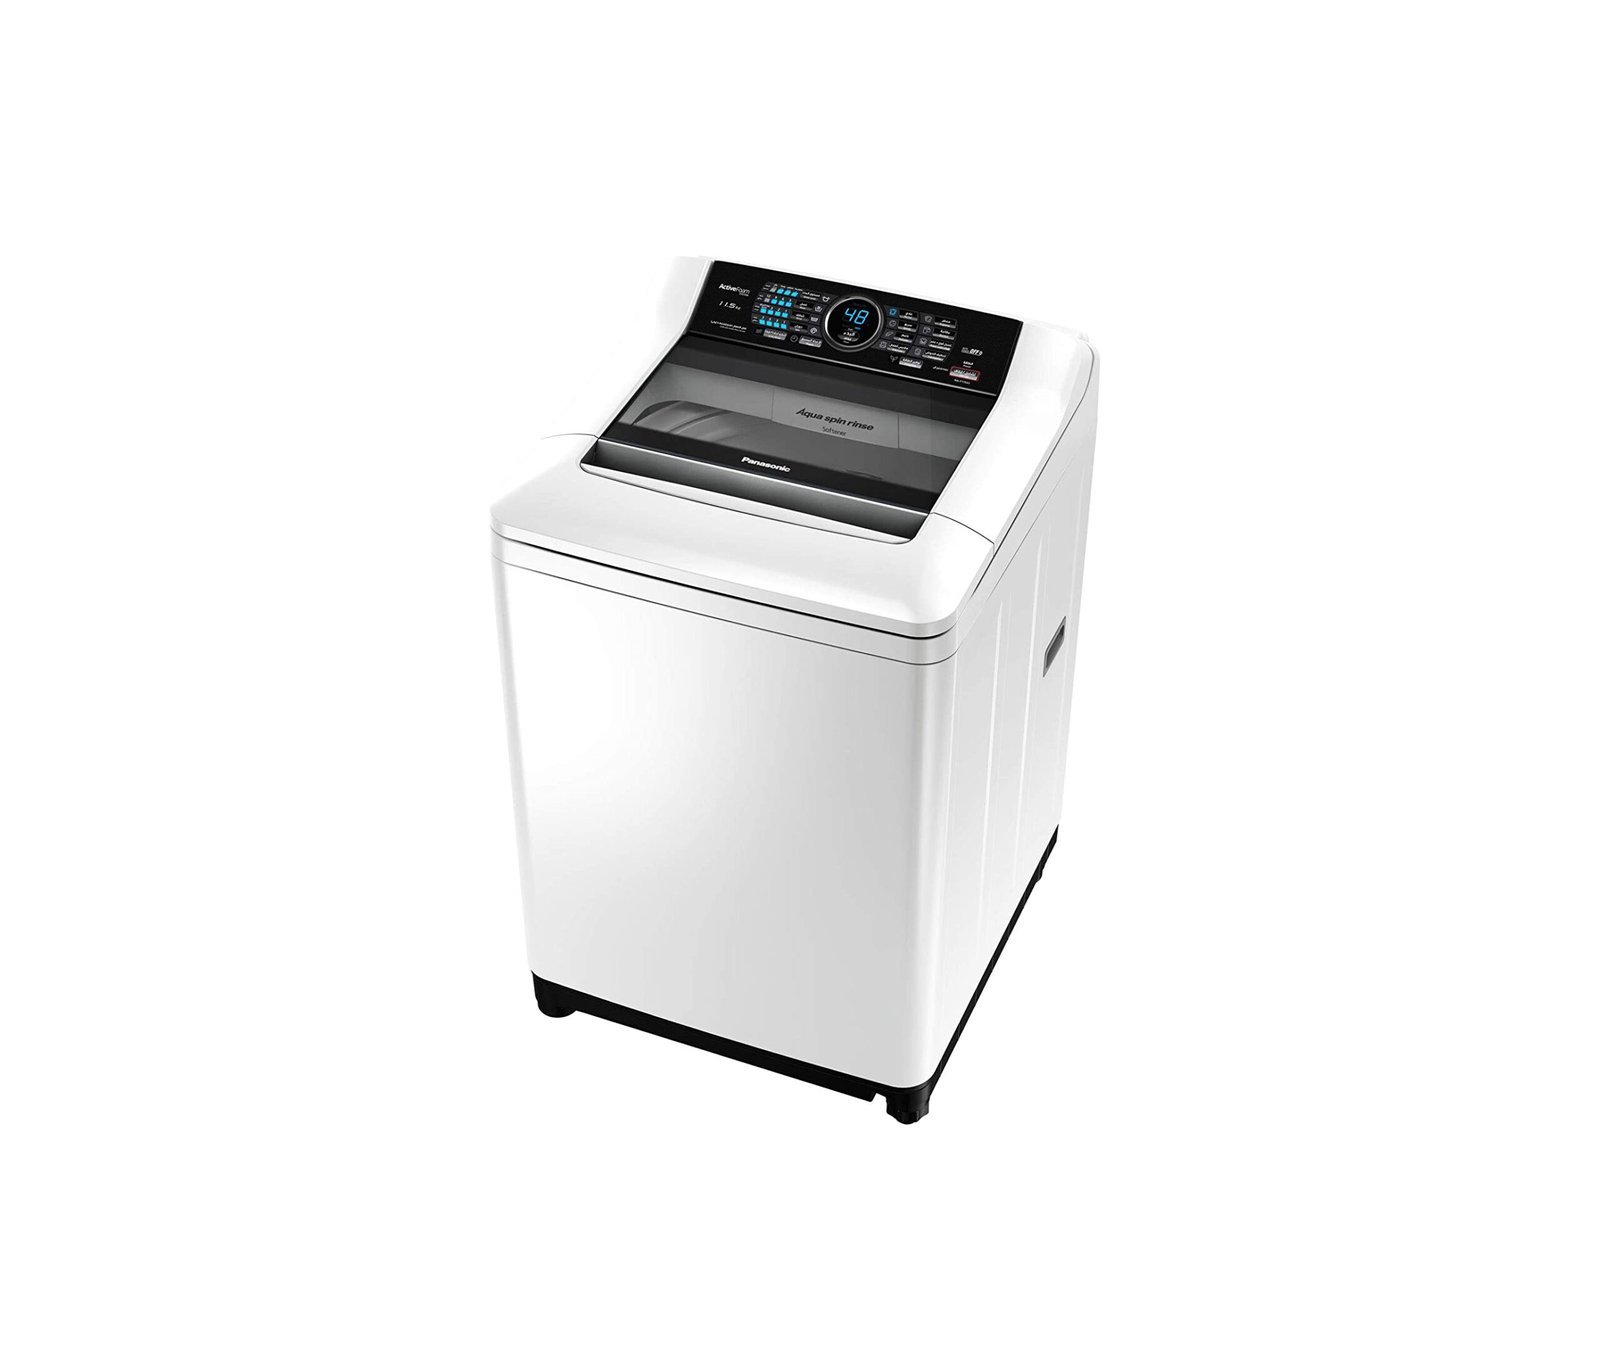 Panasonic 11 Kg Top Loading Fully Automatic Washing Machine Color White Model-NAF115A1 | 1 Year Warranty